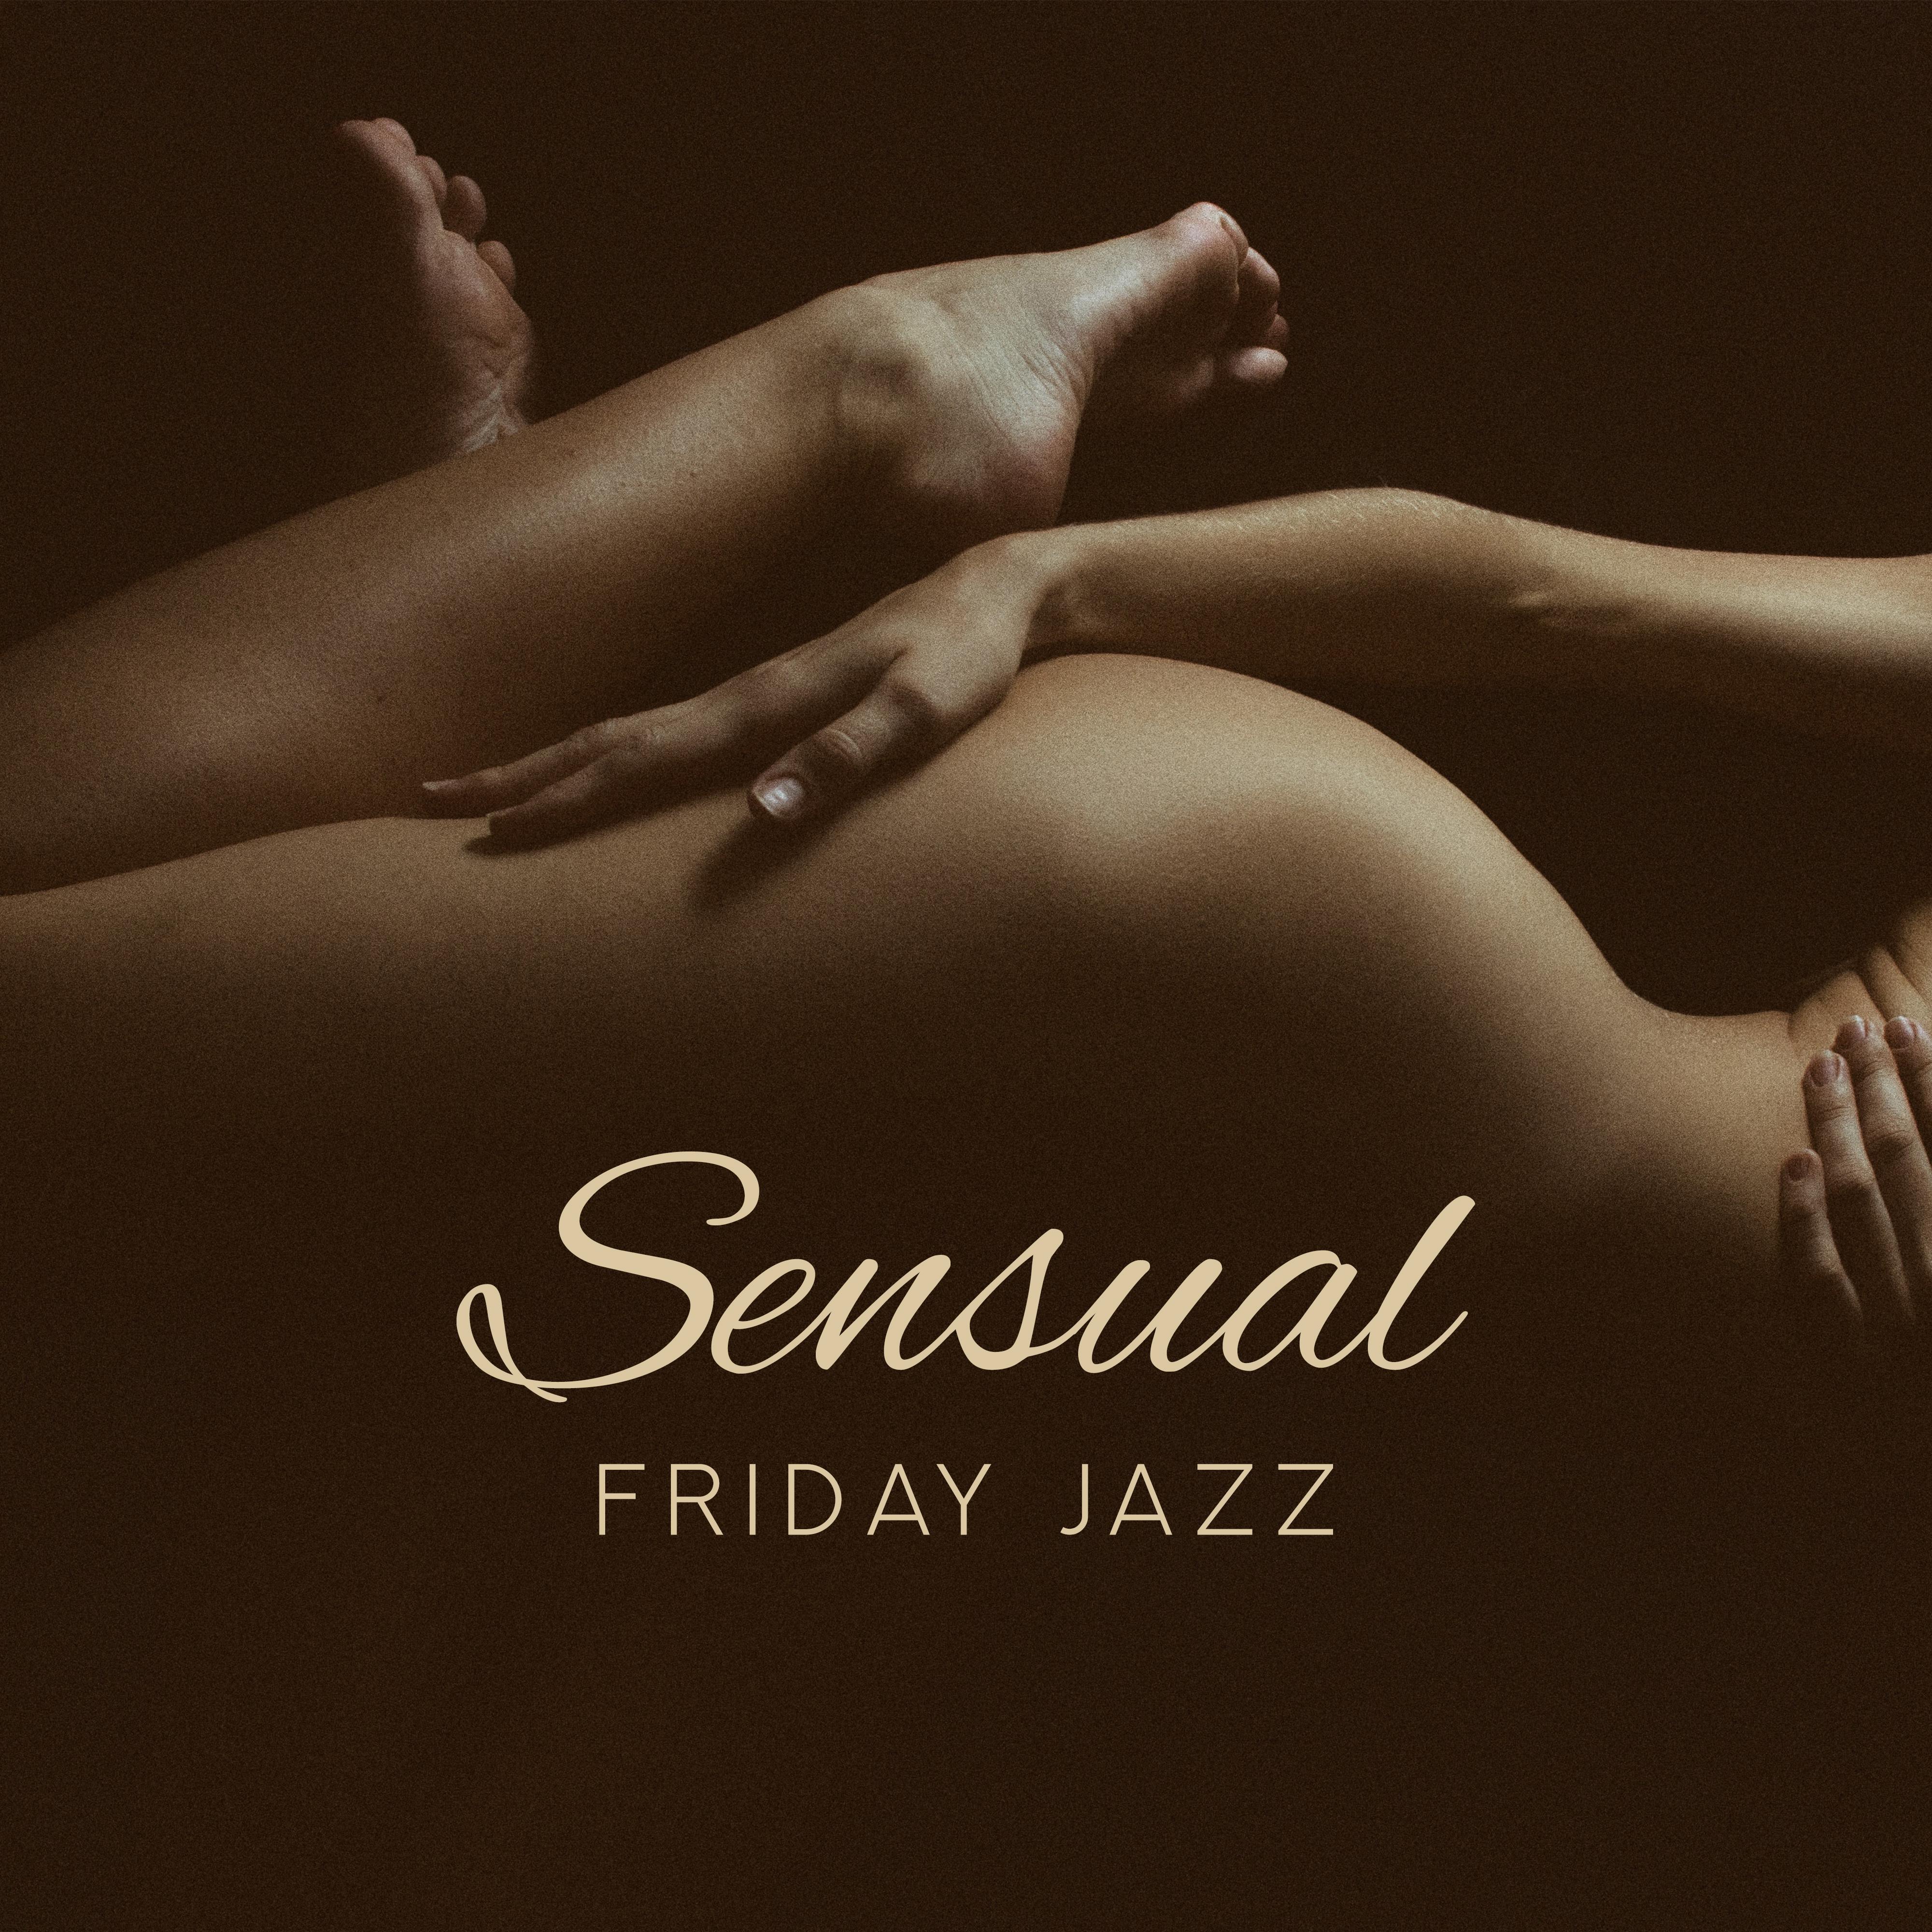 Sensual Friday Jazz – **** Smooth Music, Jazz for Lovers, Smooth Sax, Erotic Massage, *** Music at Night